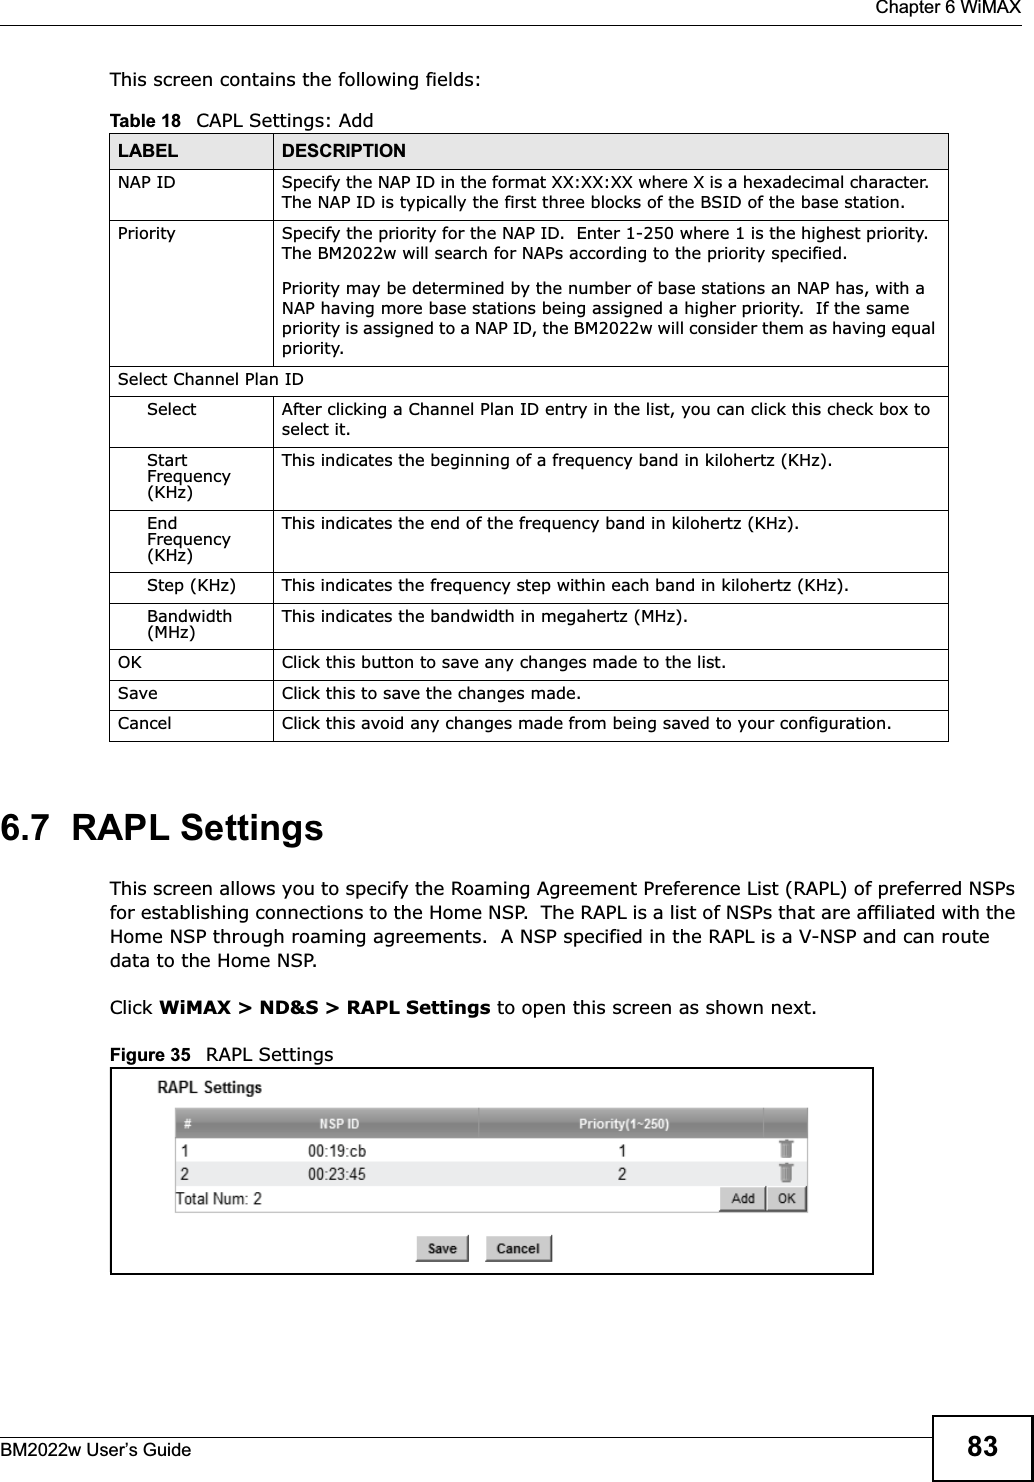  Chapter 6 WiMAXBM2022w User’s Guide 83This screen contains the following fields:6.7  RAPL SettingsThis screen allows you to specify the Roaming Agreement Preference List (RAPL) of preferred NSPs for establishing connections to the Home NSP.  The RAPL is a list of NSPs that are affiliated with the Home NSP through roaming agreements.  A NSP specified in the RAPL is a V-NSP and can route data to the Home NSP.Click WiMAX &gt; ND&amp;S &gt; RAPL Settings to open this screen as shown next.Figure 35   RAPL SettingsTable 18   CAPL Settings: AddLABEL DESCRIPTIONNAP ID Specify the NAP ID in the format XX:XX:XX where X is a hexadecimal character.  The NAP ID is typically the first three blocks of the BSID of the base station.Priority Specify the priority for the NAP ID.  Enter 1-250 where 1 is the highest priority.  The BM2022w will search for NAPs according to the priority specified.Priority may be determined by the number of base stations an NAP has, with a NAP having more base stations being assigned a higher priority.  If the same priority is assigned to a NAP ID, the BM2022w will consider them as having equal priority.Select Channel Plan IDSelect After clicking a Channel Plan ID entry in the list, you can click this check box to select it.StartFrequency (KHz)This indicates the beginning of a frequency band in kilohertz (KHz).EndFrequency (KHz)This indicates the end of the frequency band in kilohertz (KHz).Step (KHz) This indicates the frequency step within each band in kilohertz (KHz).Bandwidth (MHz) This indicates the bandwidth in megahertz (MHz).OK Click this button to save any changes made to the list.Save Click this to save the changes made.Cancel Click this avoid any changes made from being saved to your configuration.